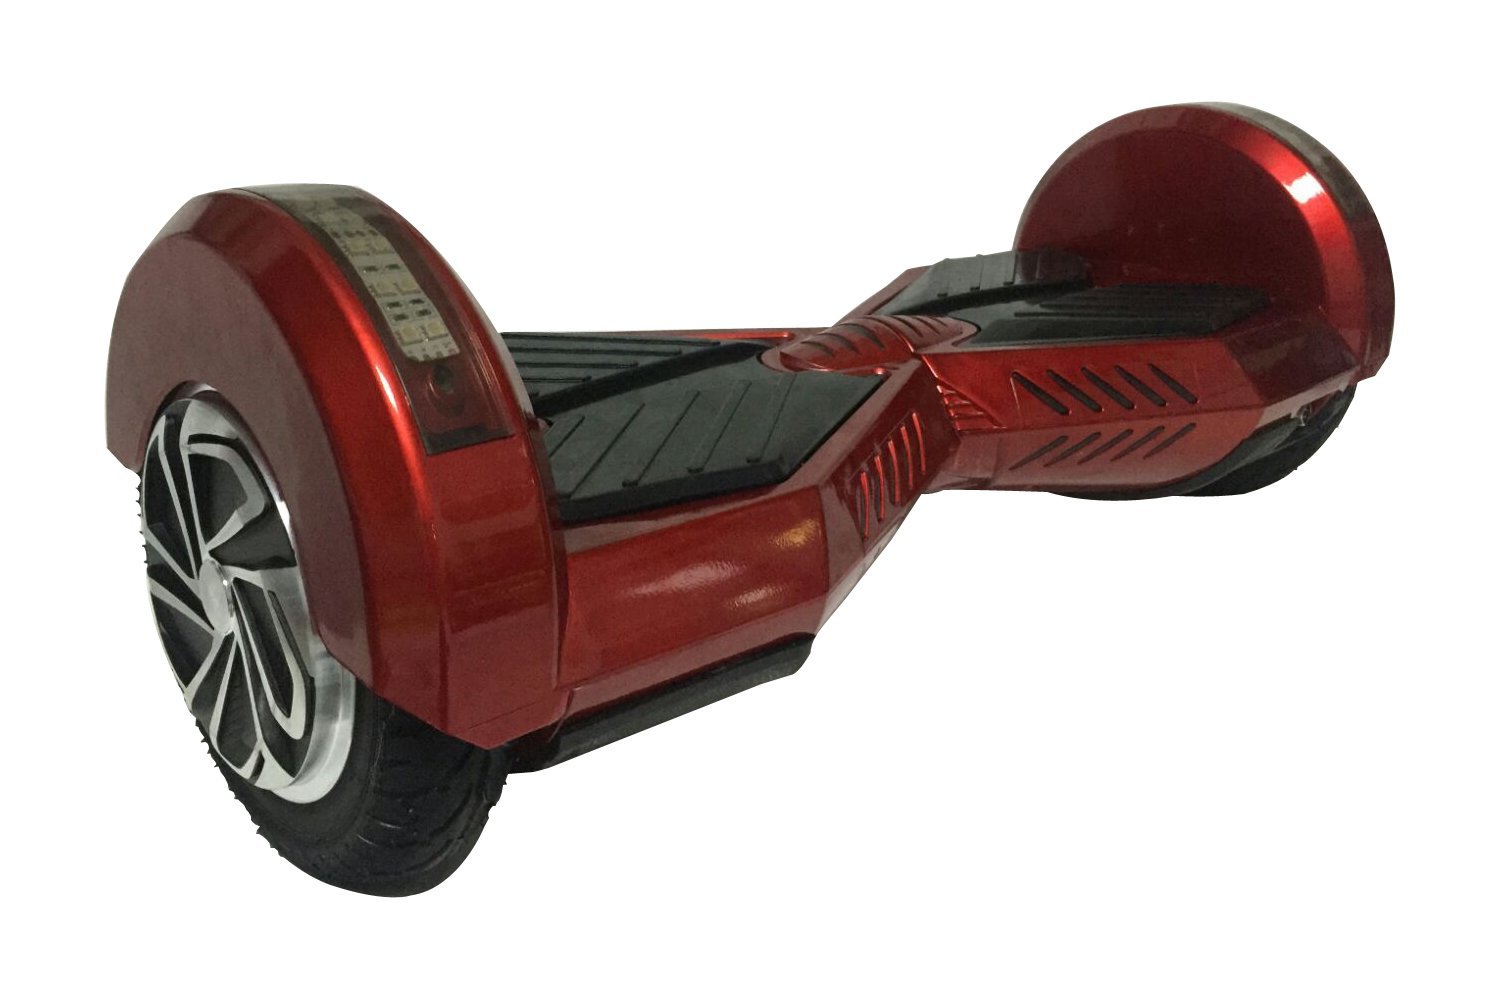 Hoverboard Design Your Own